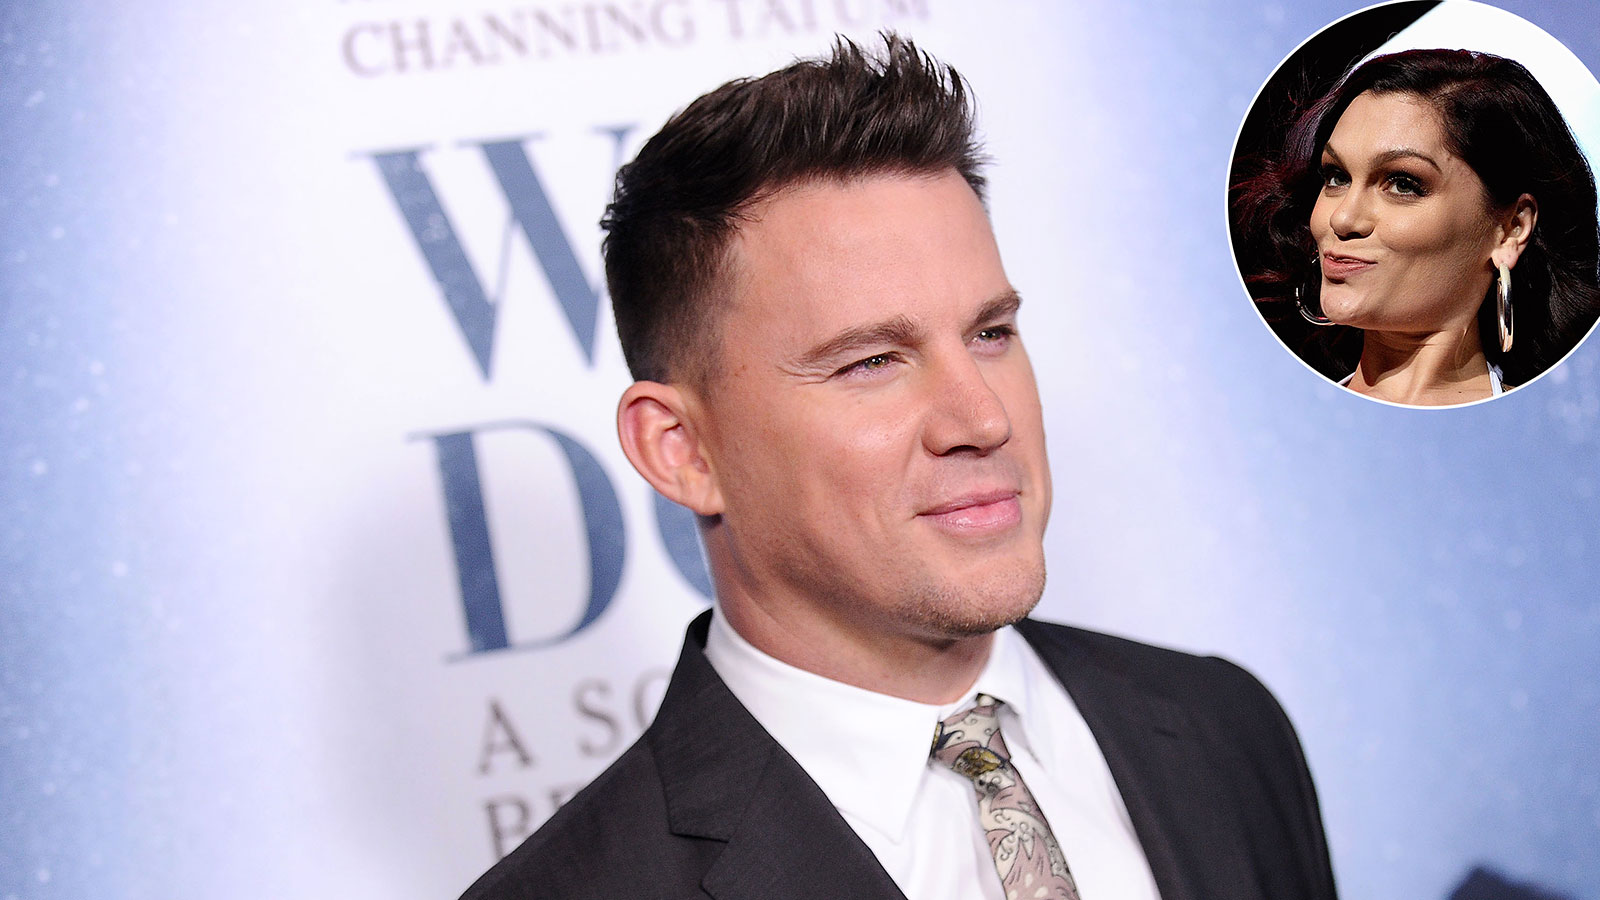 Channing Tatum Naked Photo Actor Posts NSFW Pic After Losing Jenga